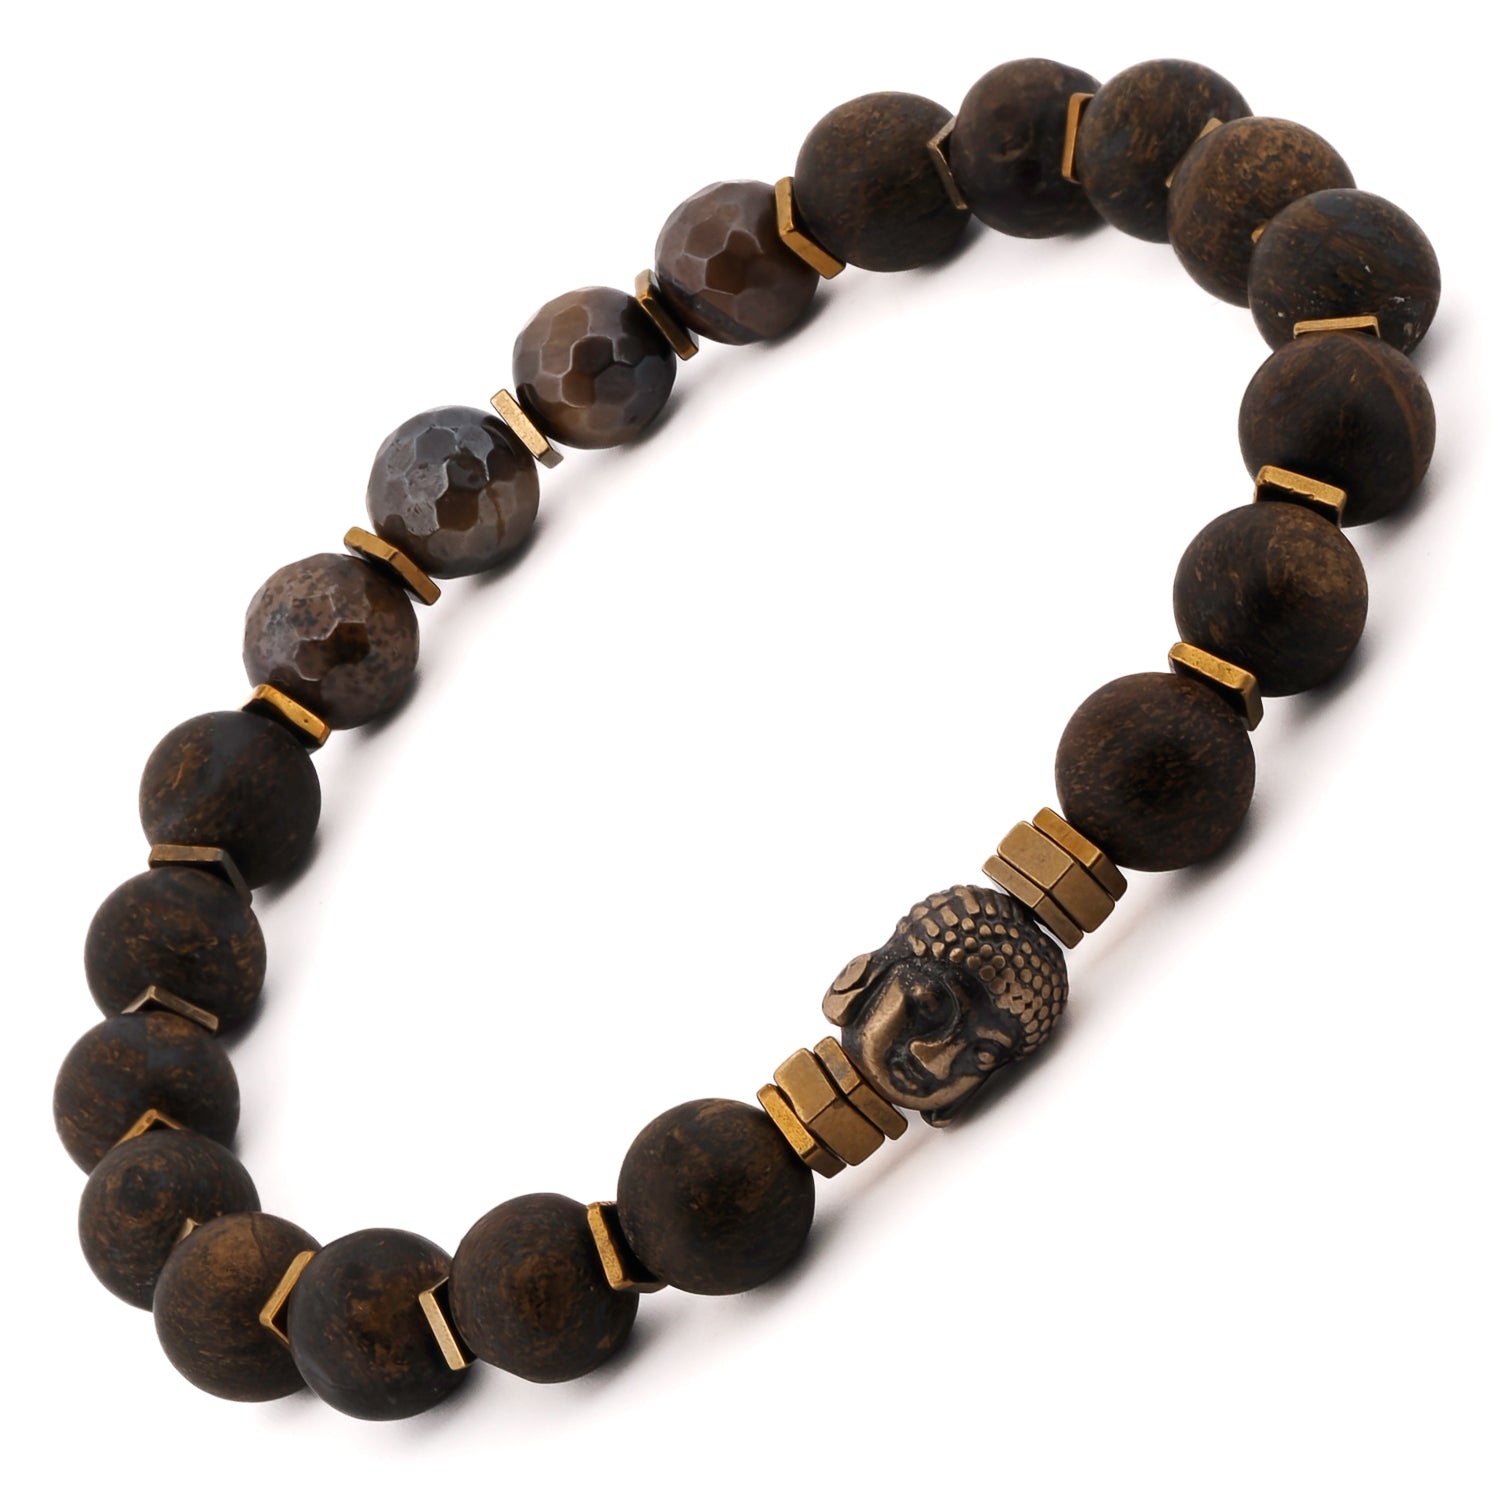 Stylish Nepal Spiritual Bracelet with a bronze Buddha bead, perfect for special occasions or everyday wear